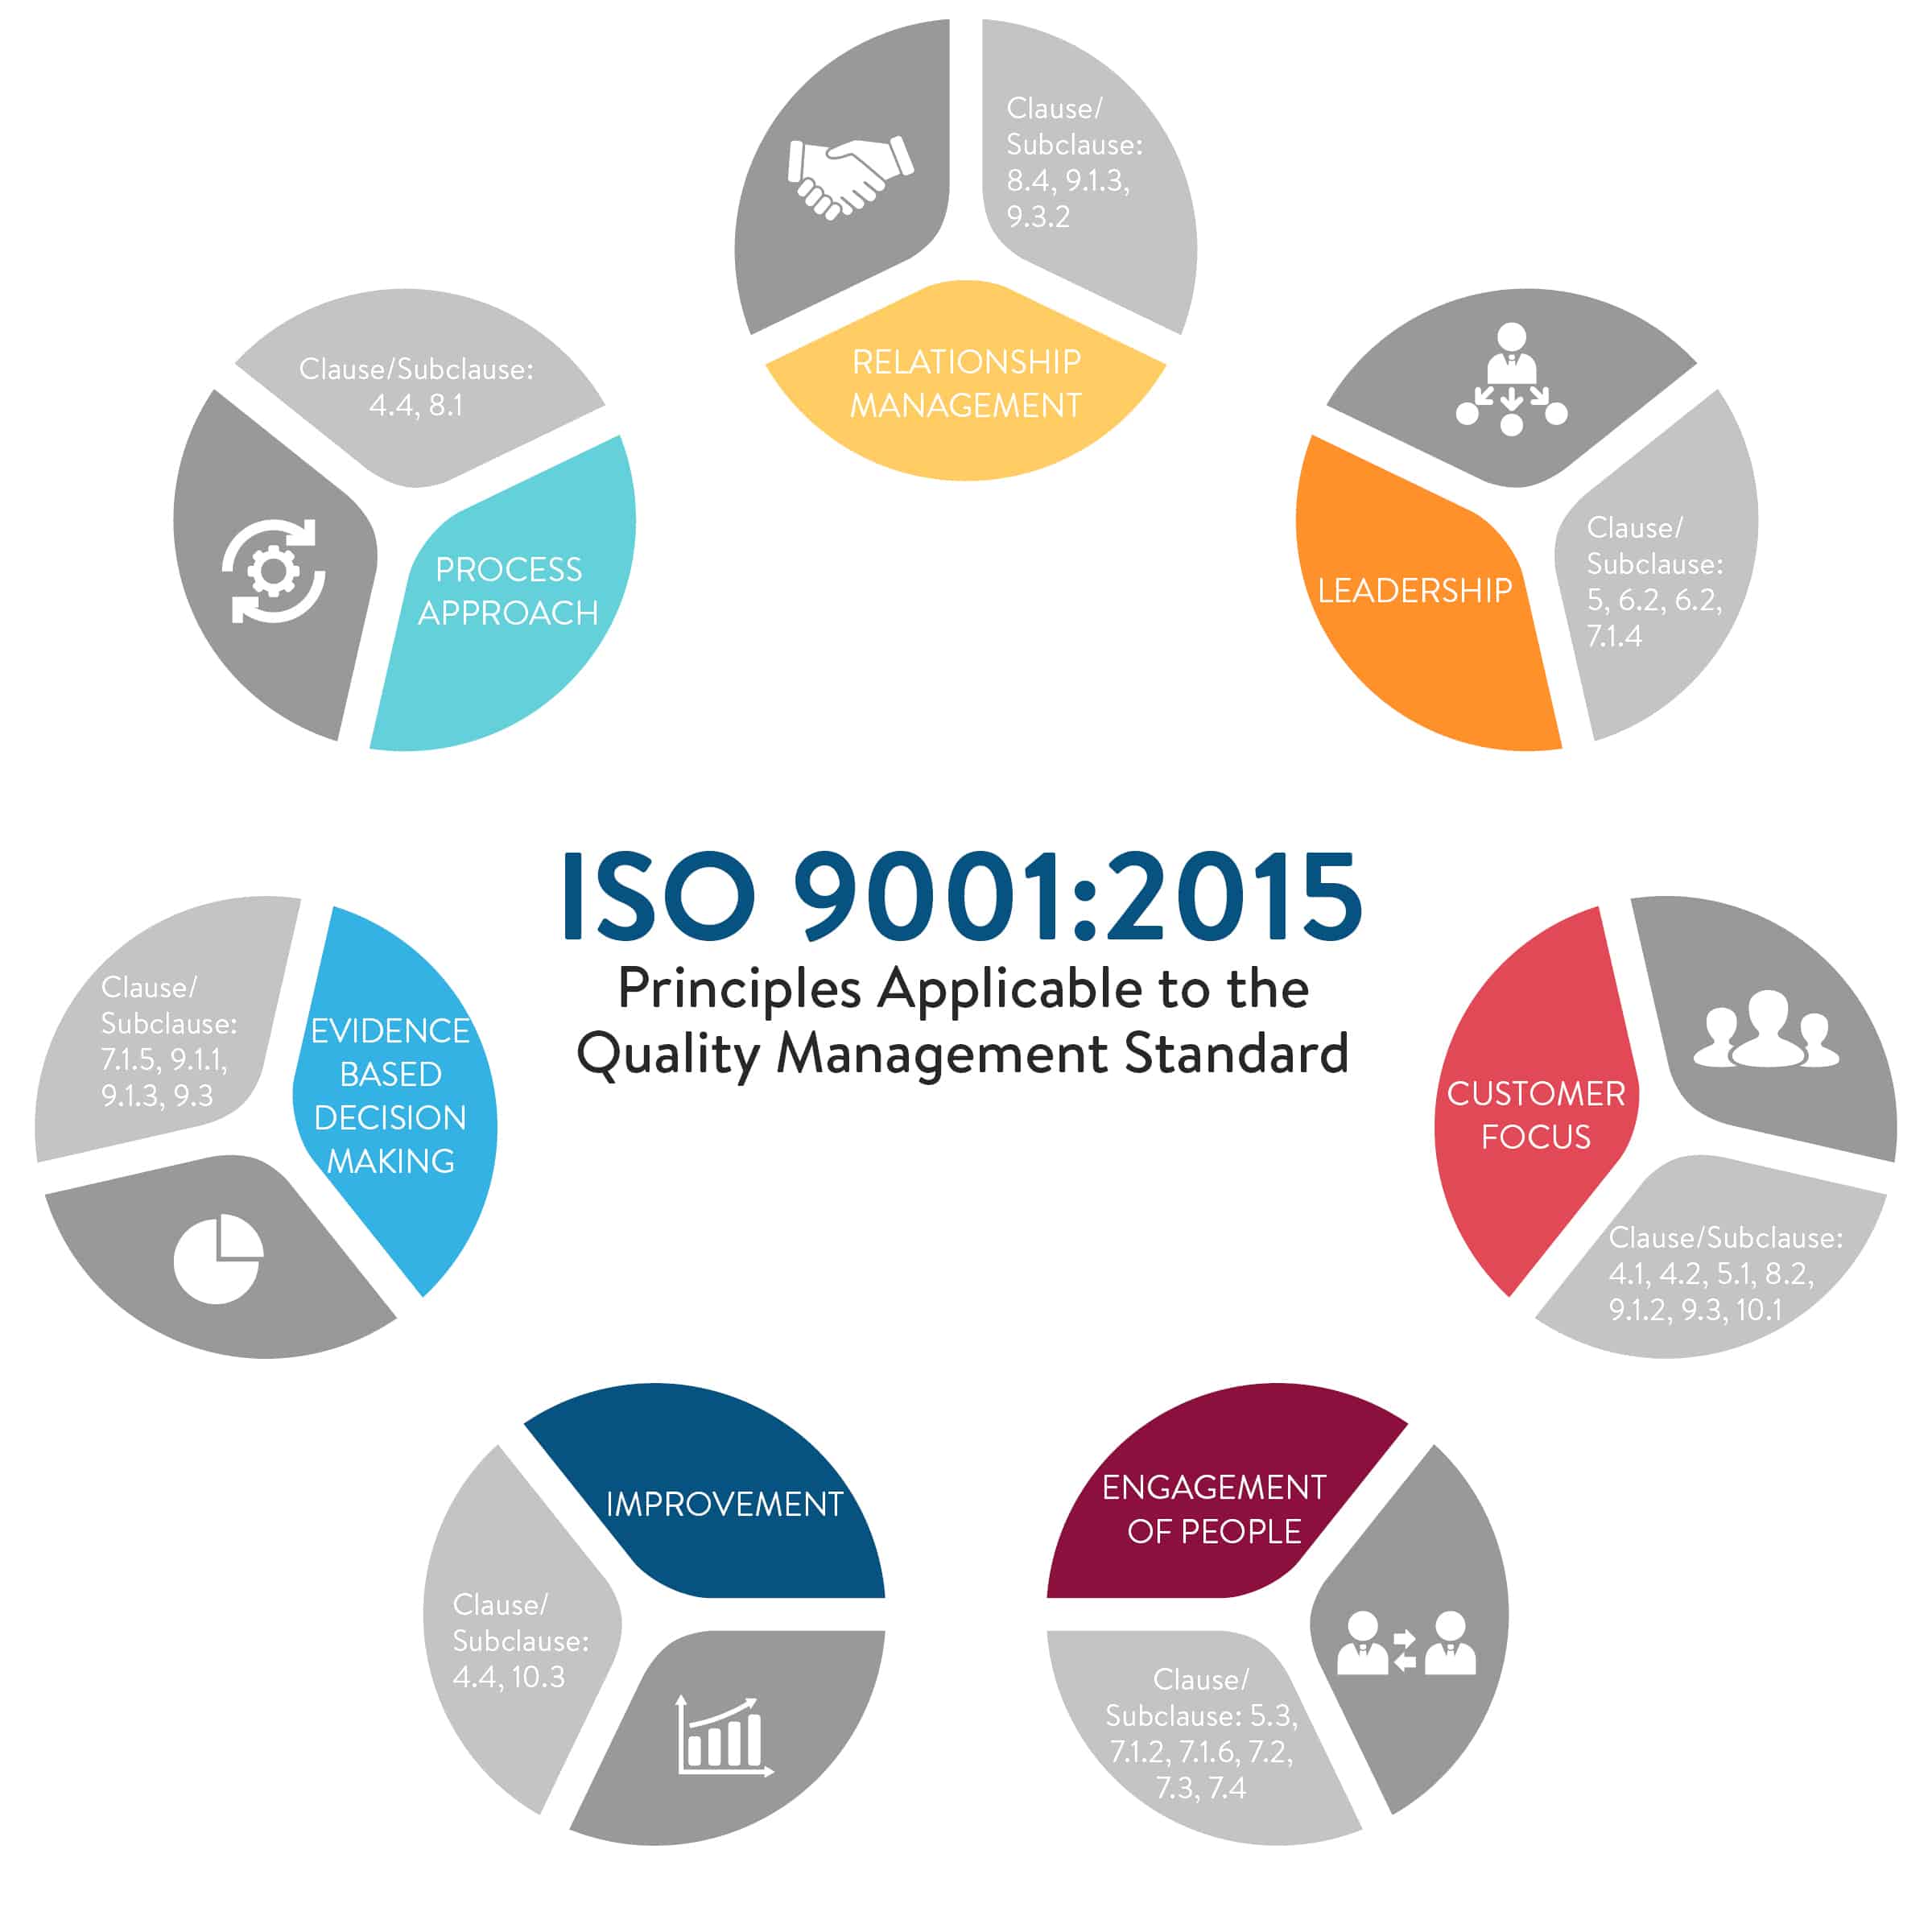 Principles Applicable to the Quality Management Standard ISO 9001:2015